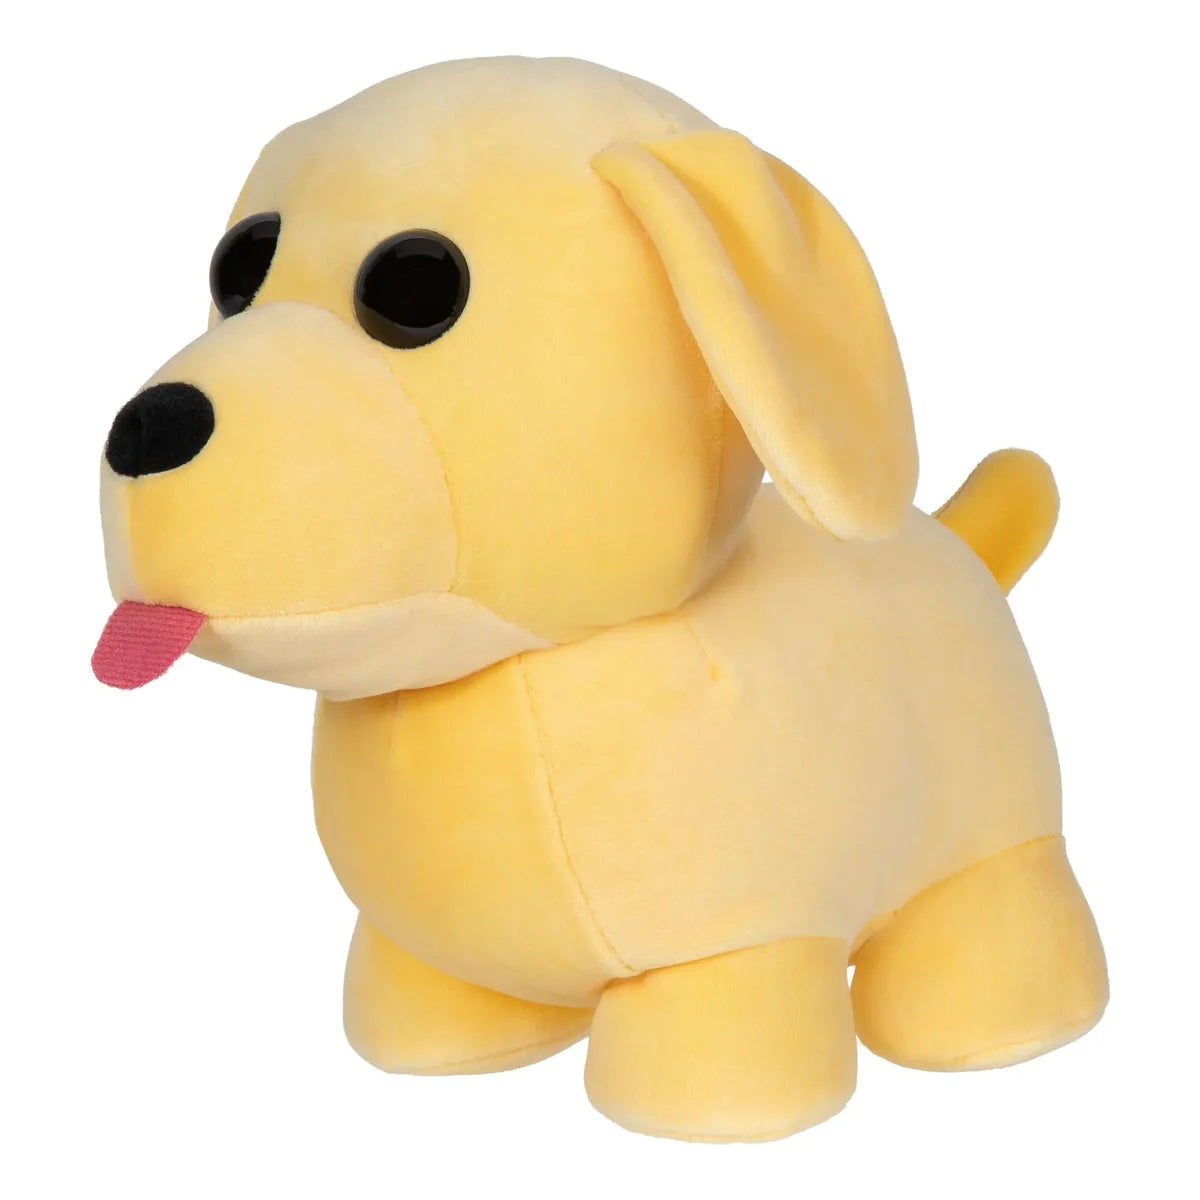 Adopt Me Series 1 Dog 8 Inch Collector Plush Soft Toy